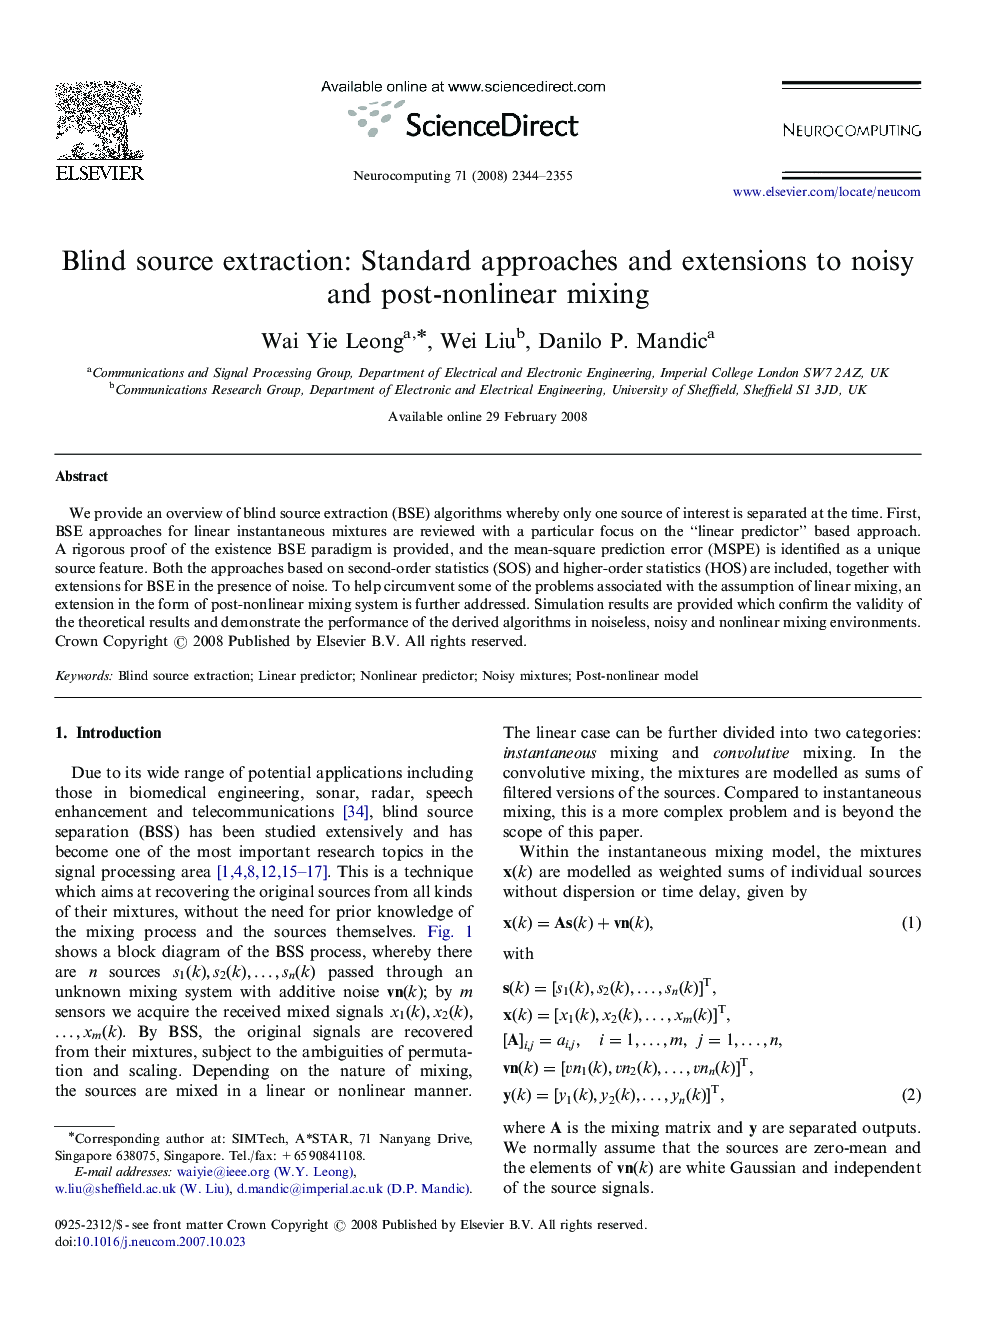 Blind source extraction: Standard approaches and extensions to noisy and post-nonlinear mixing